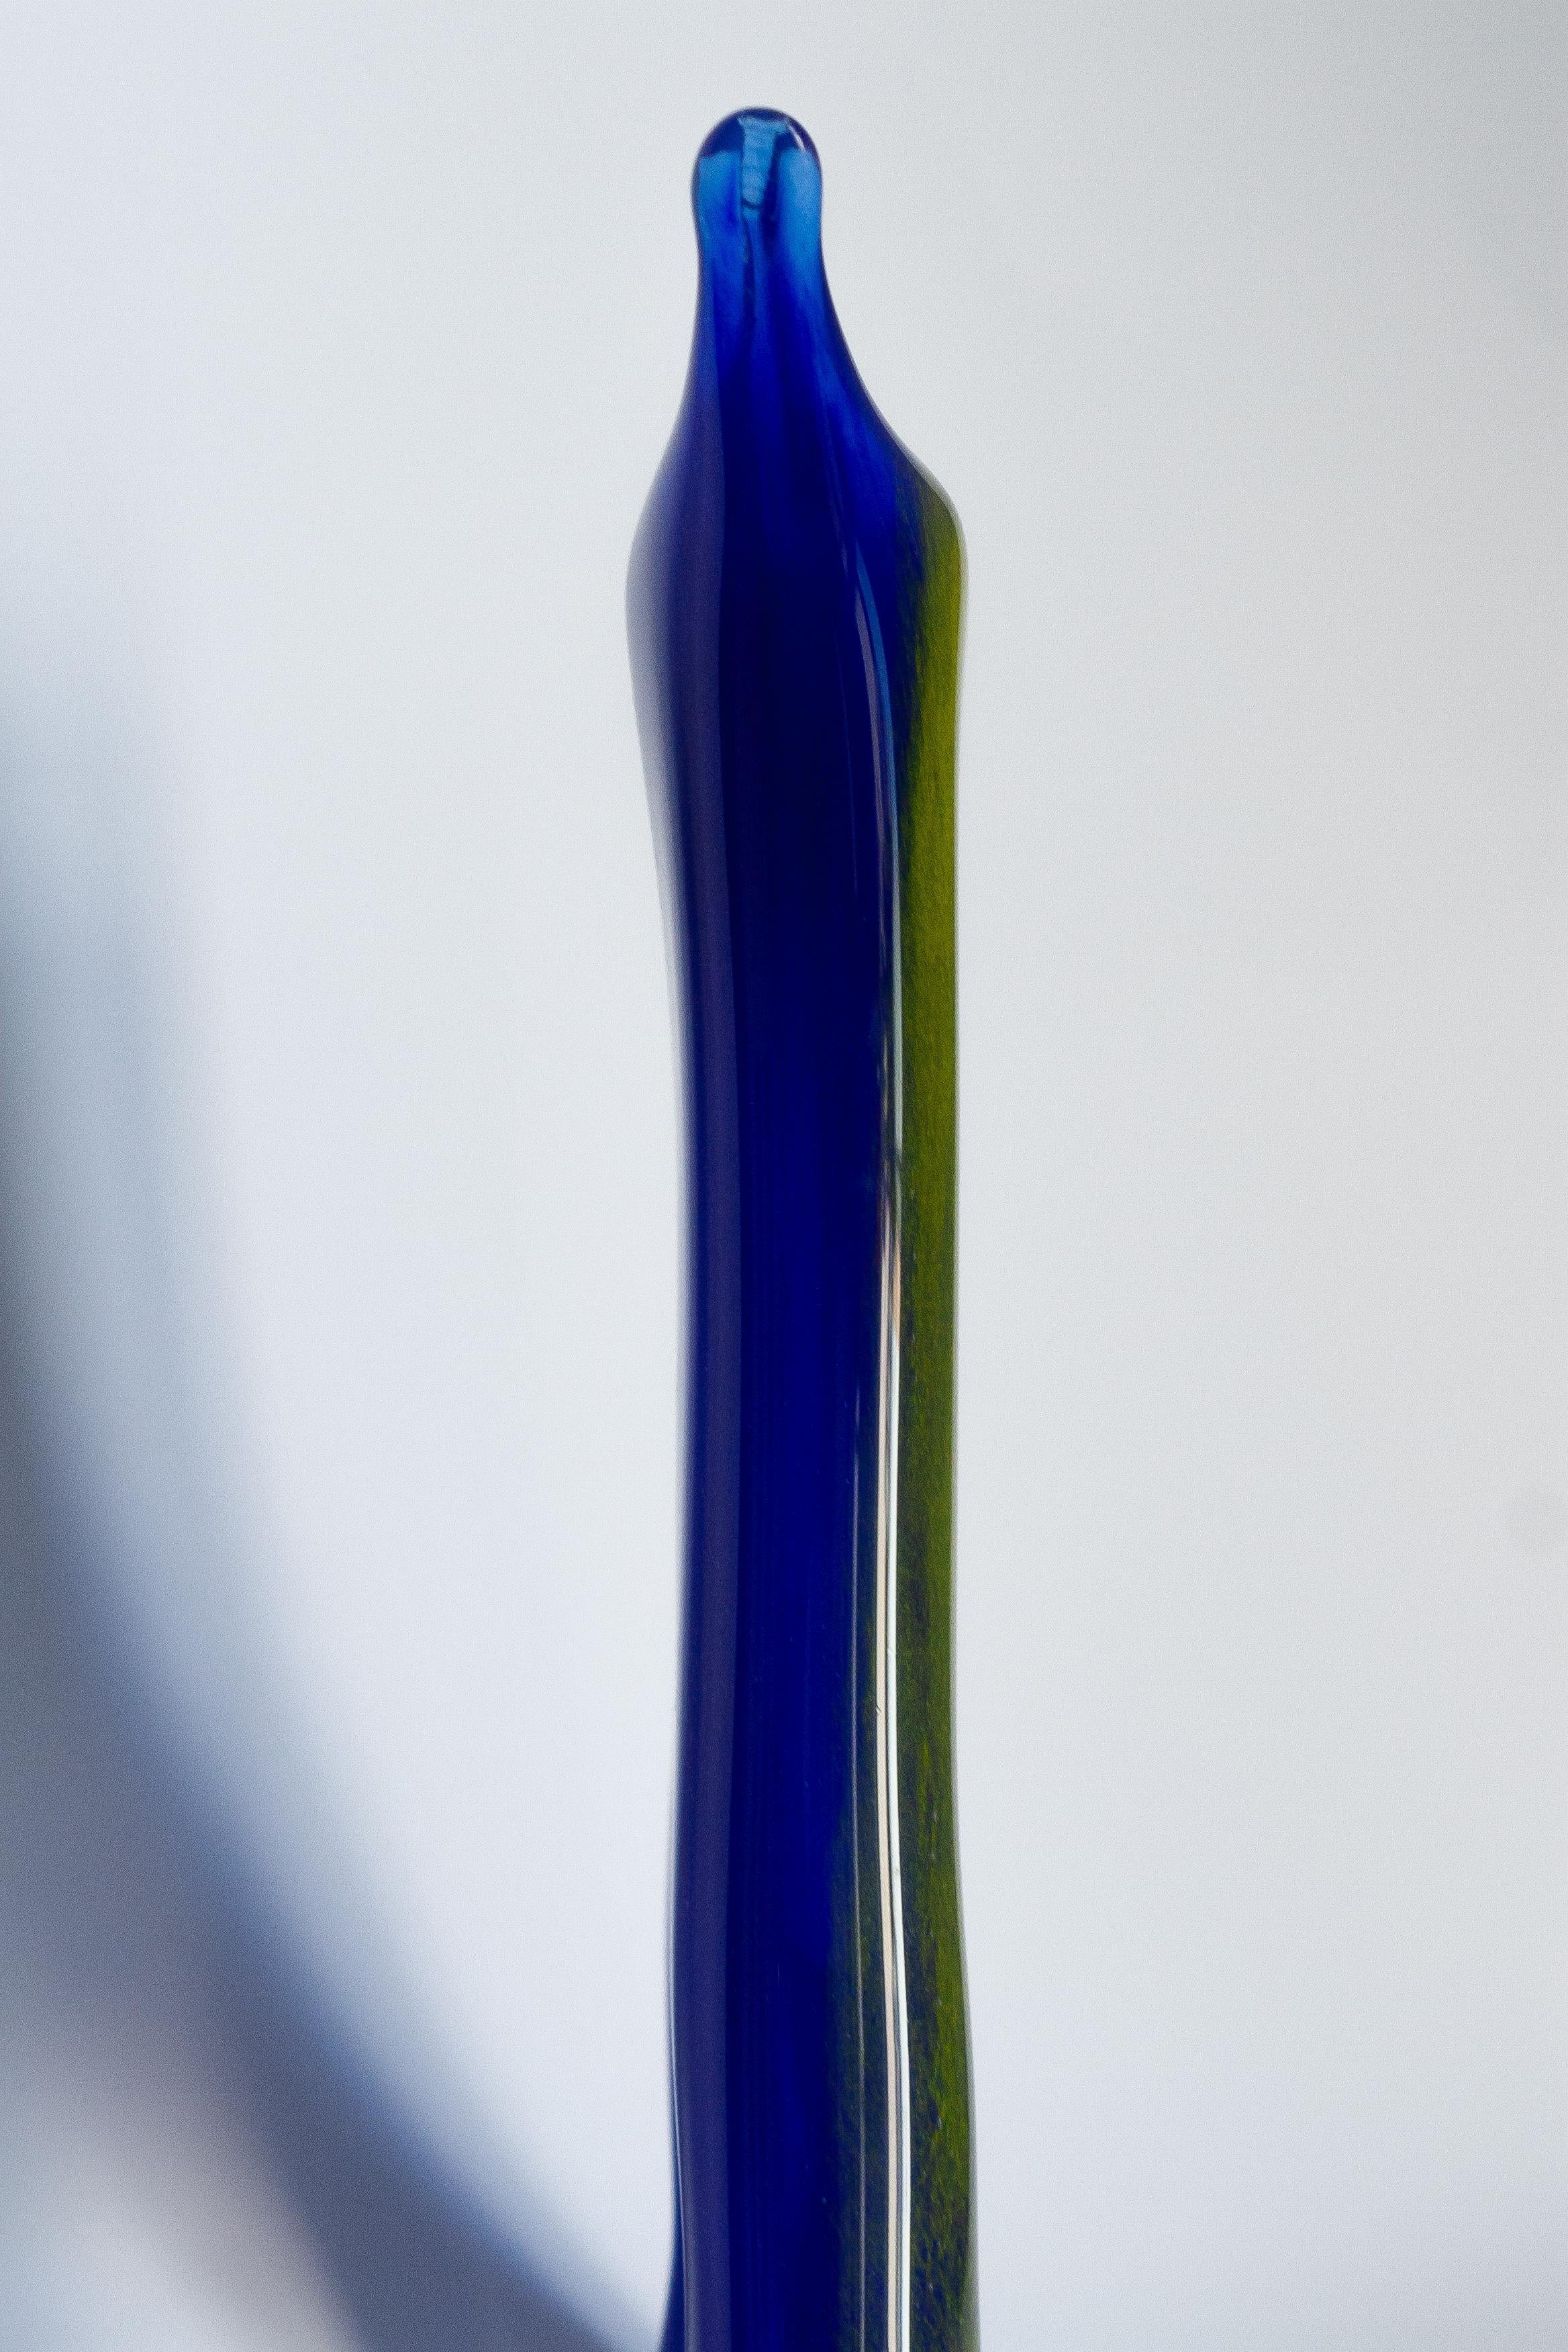 Mid Century Ultramarine Blue and Yellow Artistic Vase, Europe, 1960s For Sale 3